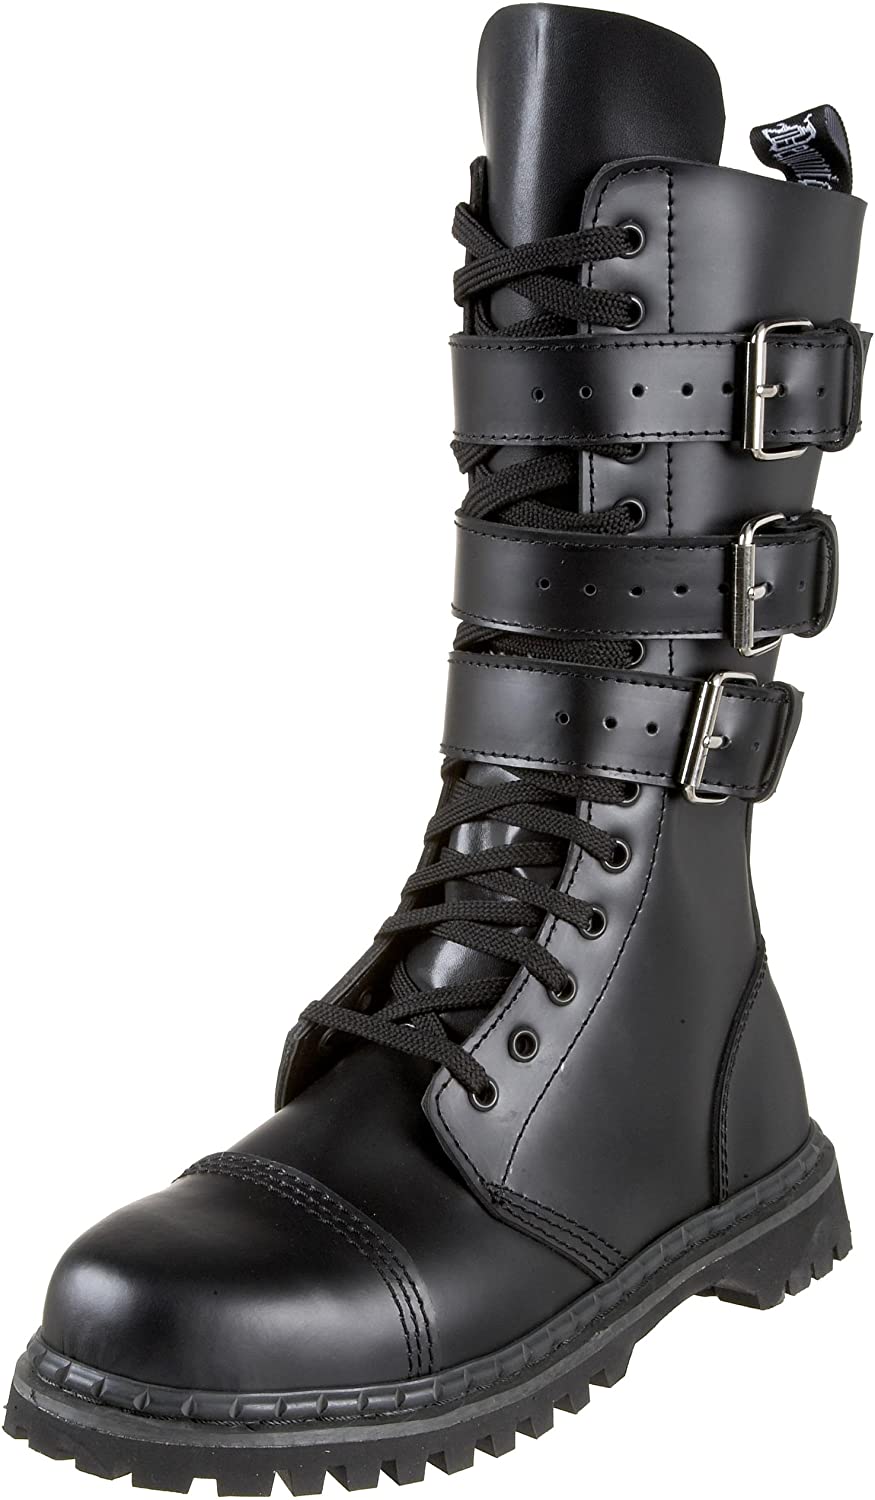 outer side view of Real black leather full front lace-up, no zipper mid-calf boot features 3 adjustable straps over top of laces